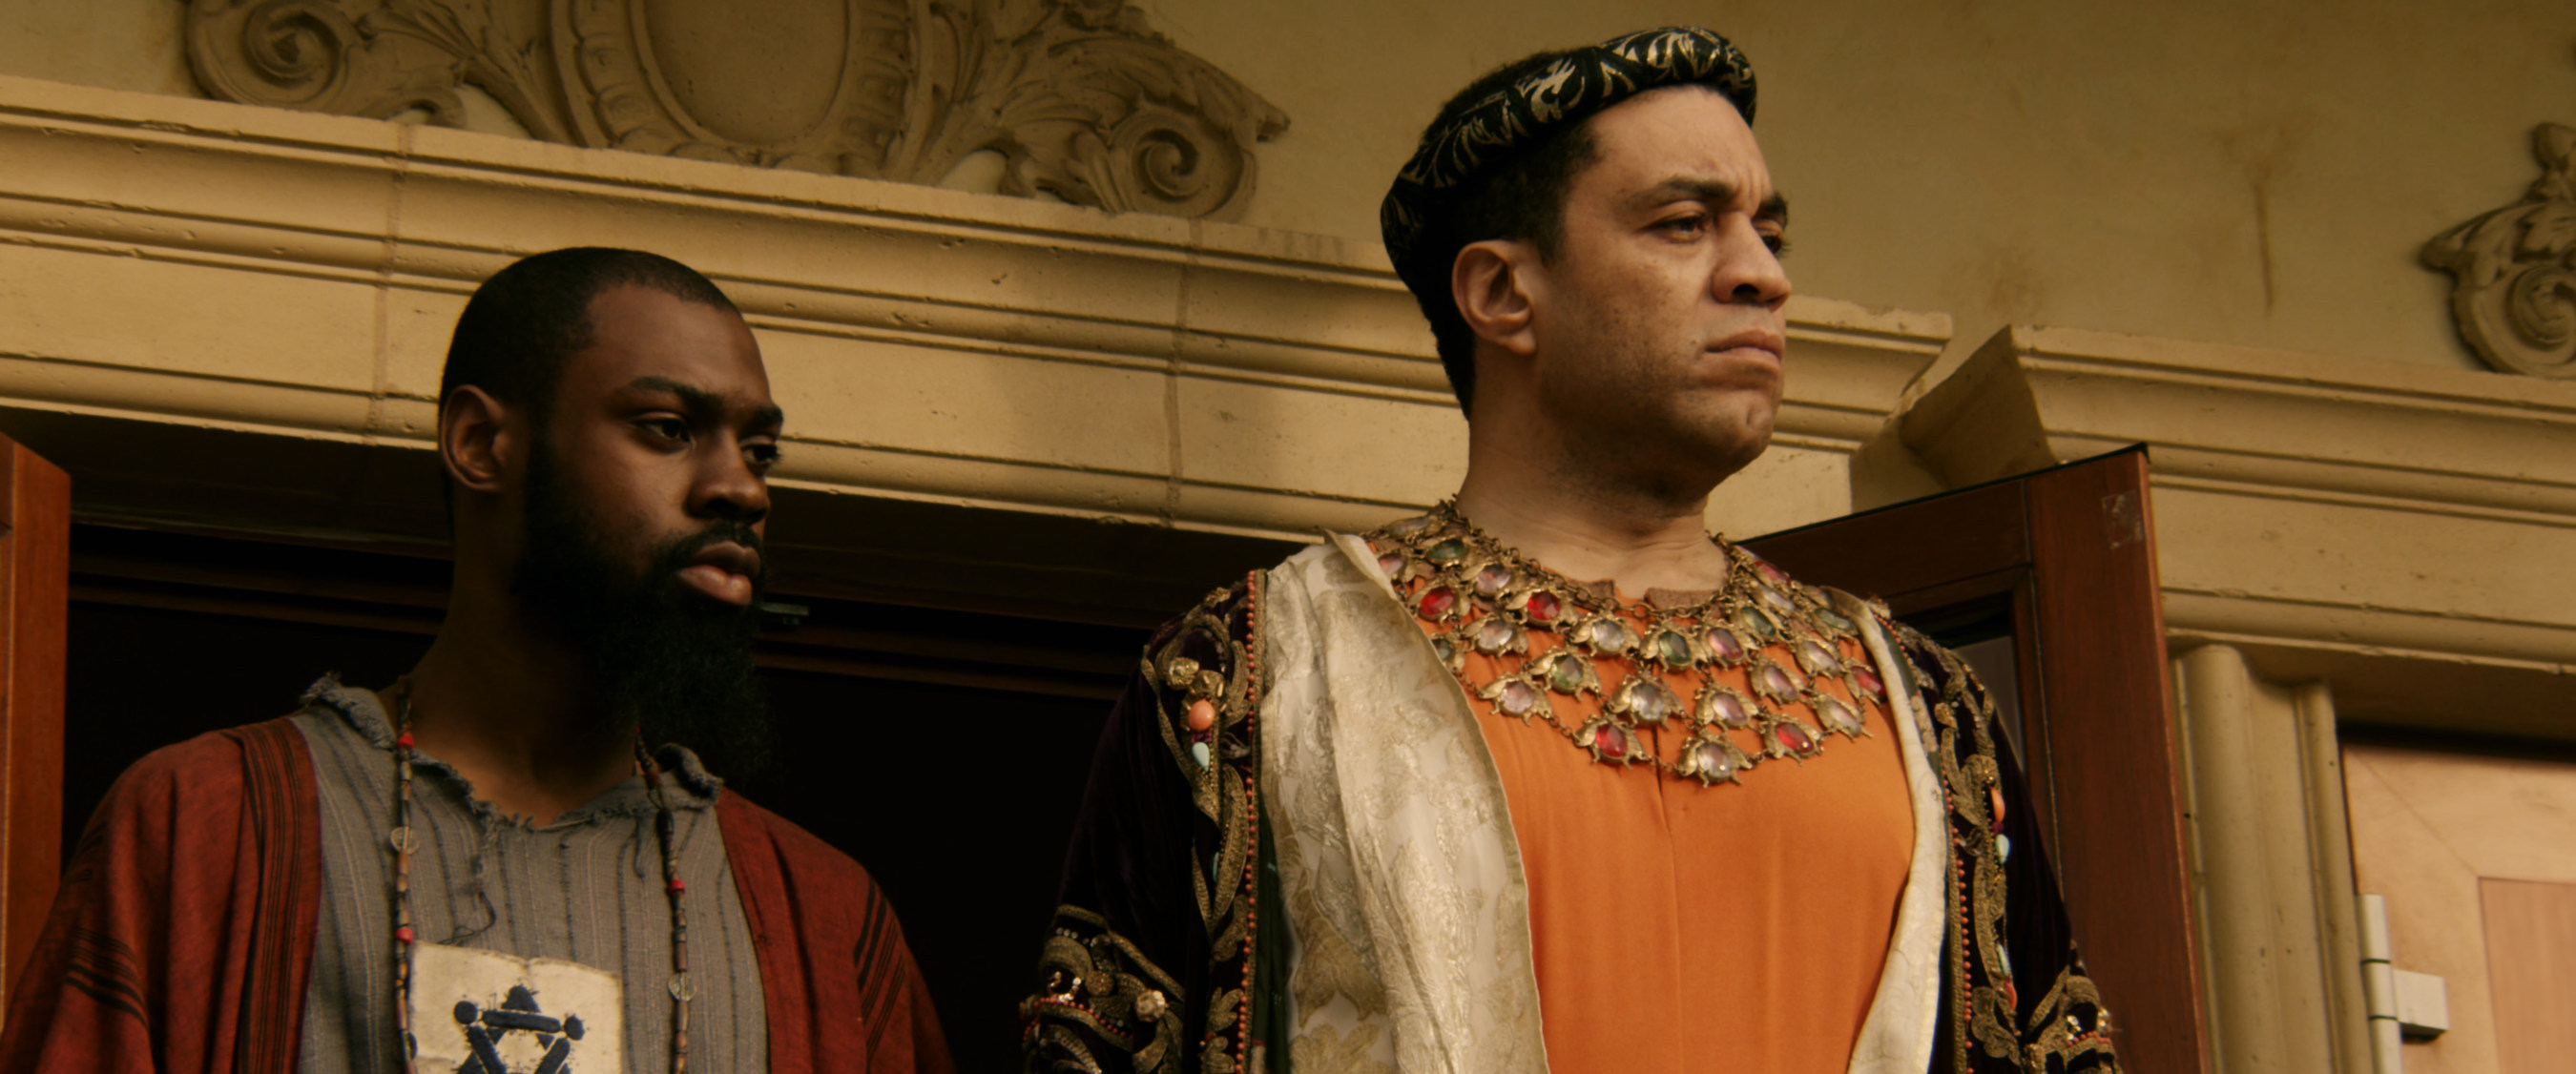 Mali Music (left) as Jesus and Harry Lennix (right) as Pontius Pilate in the upcoming feature film musical Revival! The Experience.